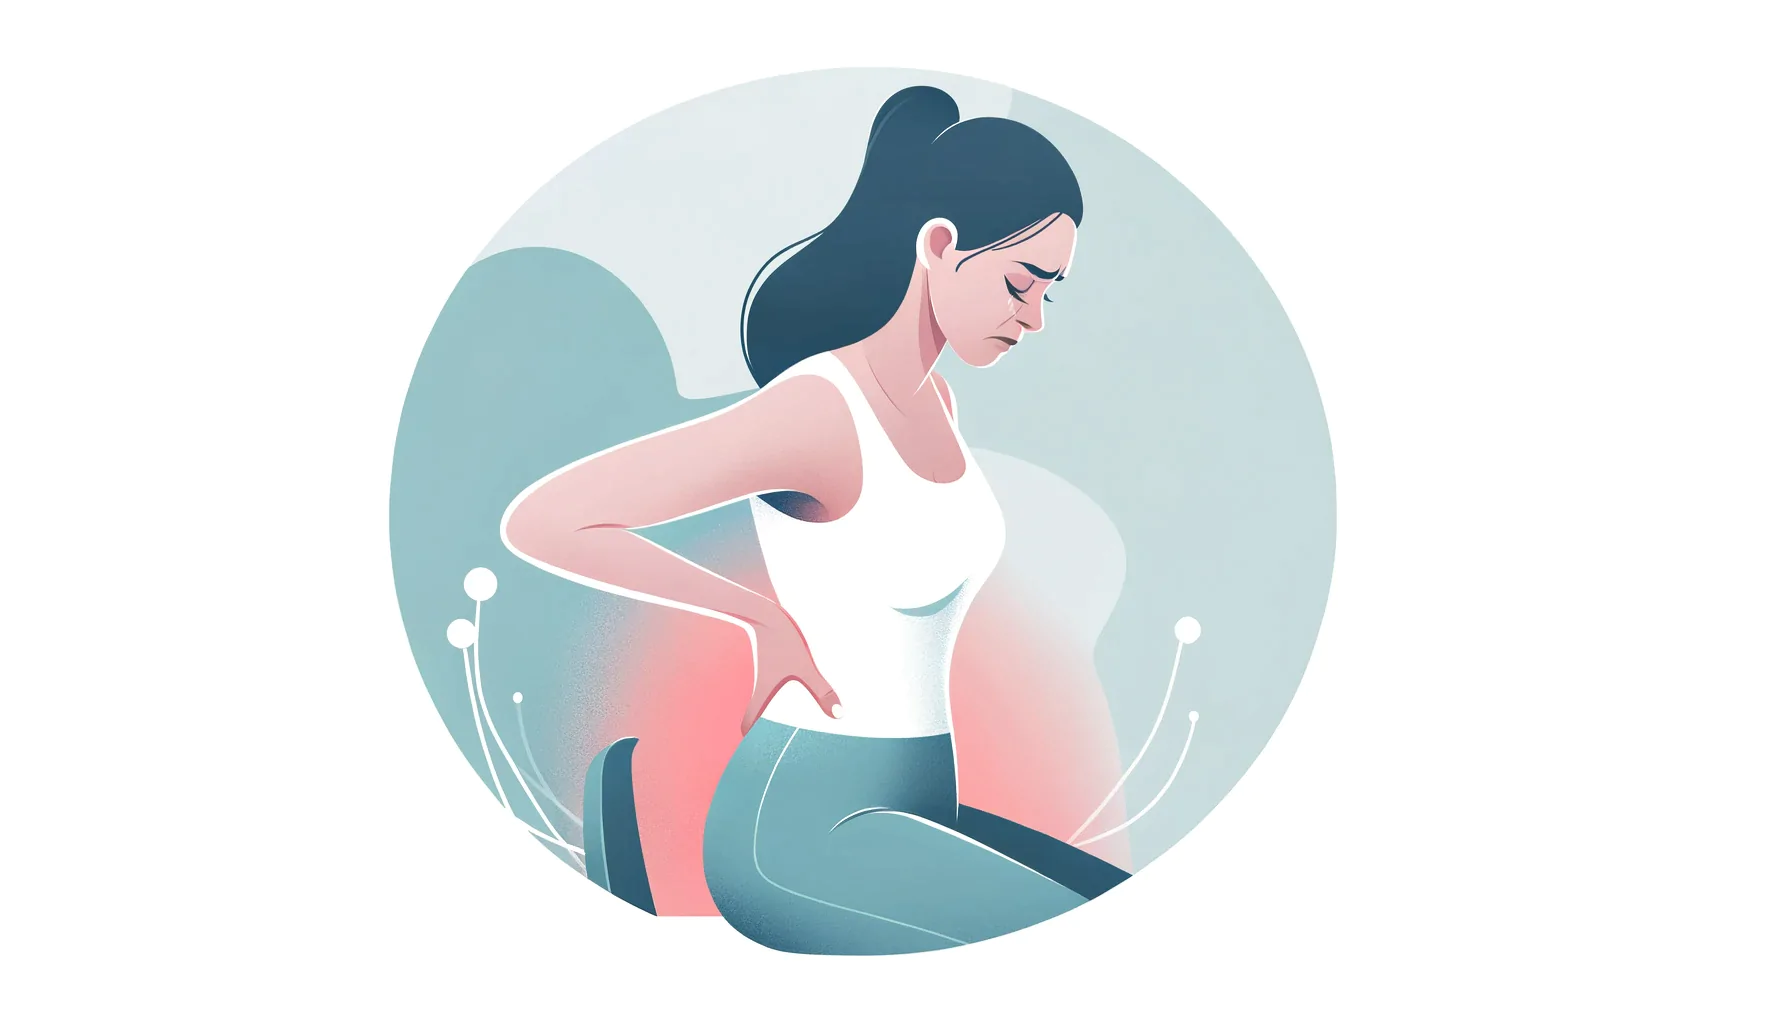 A blog banner showing a woman experiencing back pain. The woman, depicted in a modern style, is holding her lower back in a gesture of discomfort, set against a soft-colored, minimalistic background, conveying a sense of health and wellness.